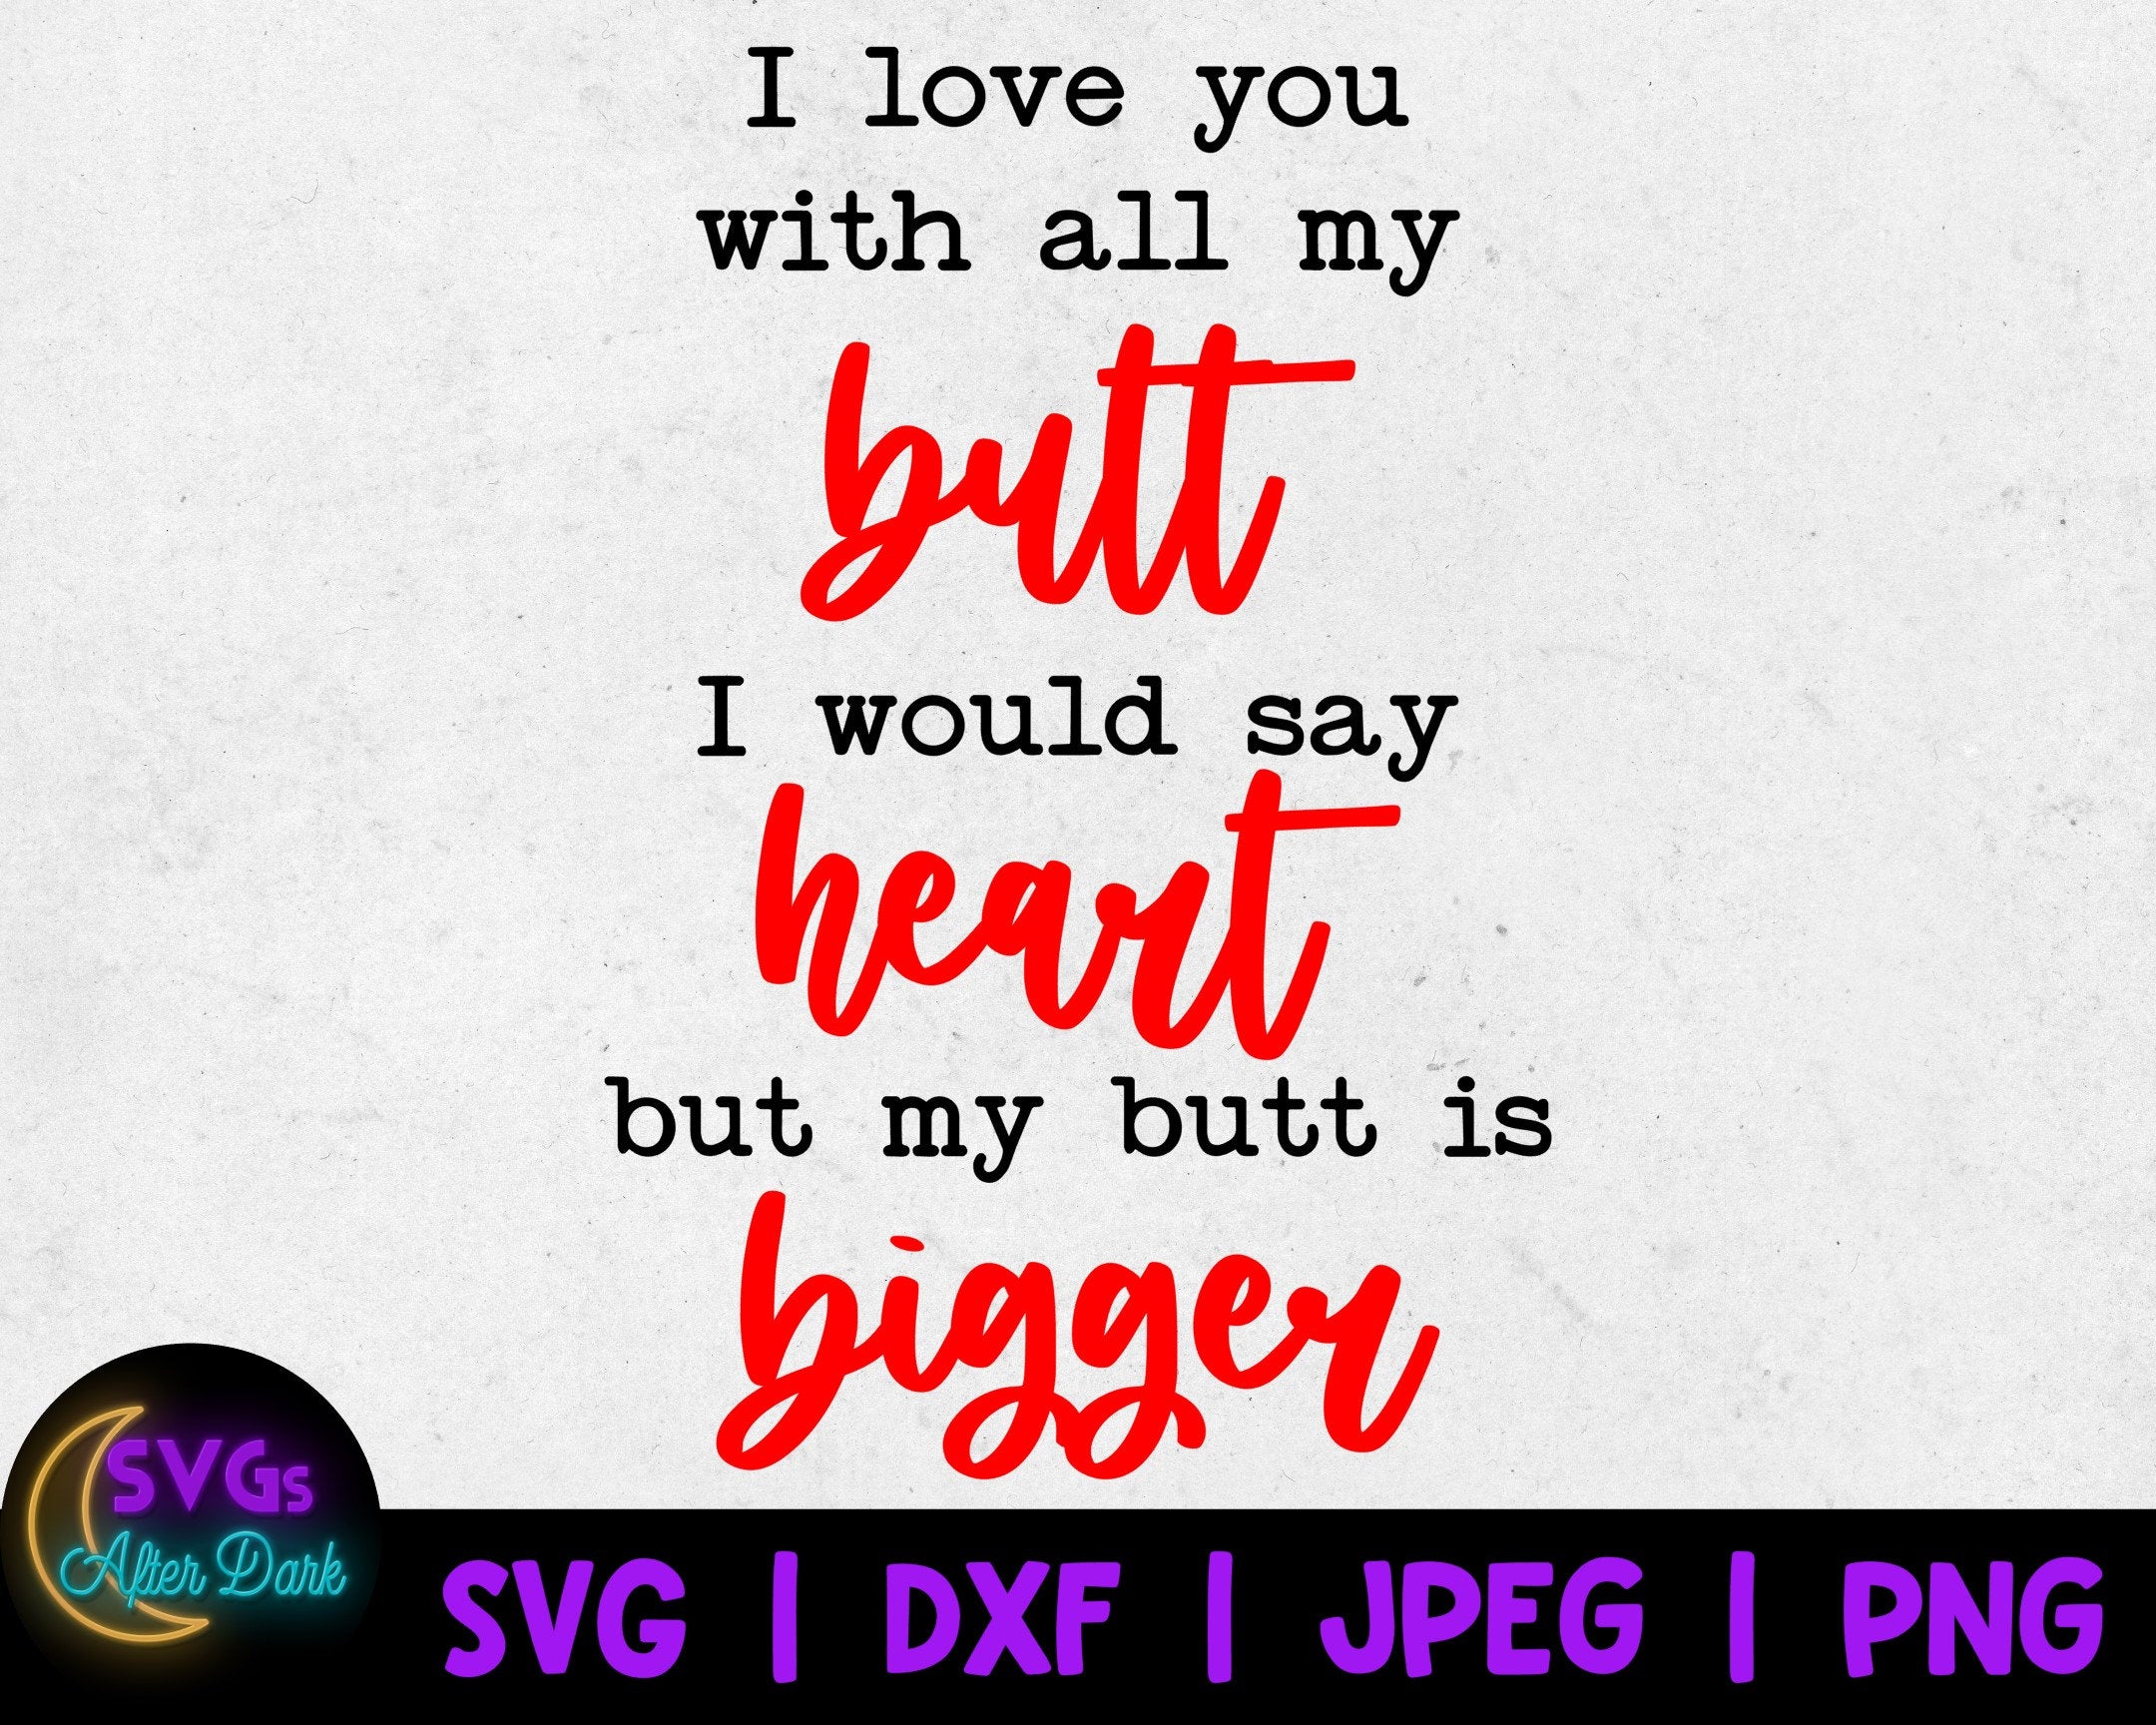 NSFW SVG - Love you with all of my butt SVG - Dirty Valentine's Day Svg